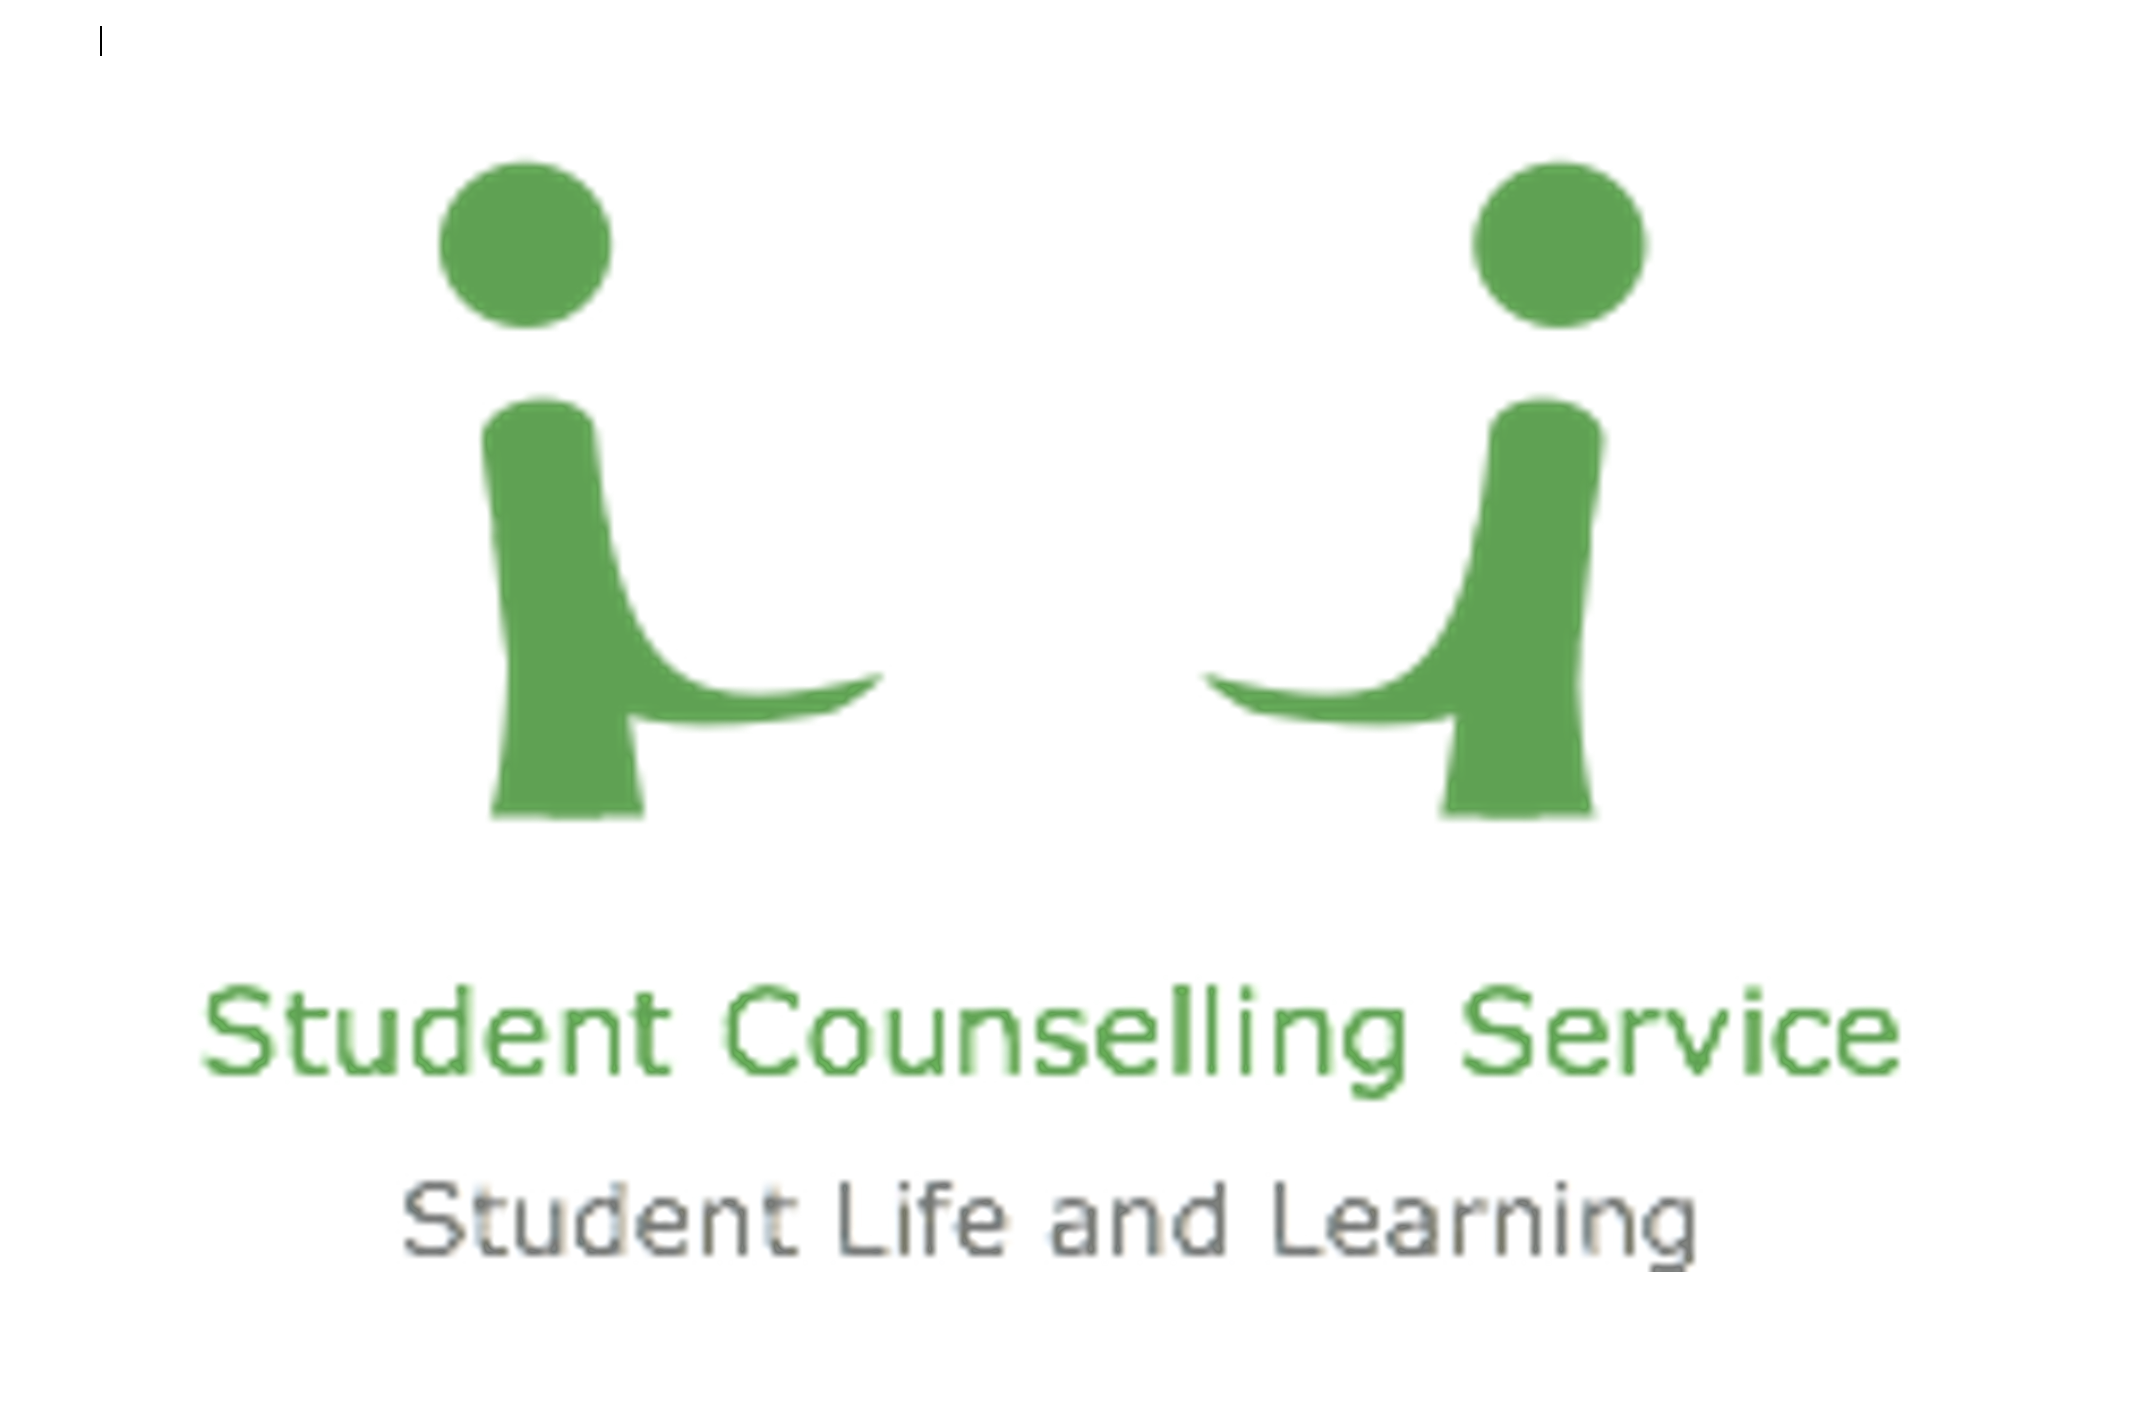 WIT Student Counselling Service main logo